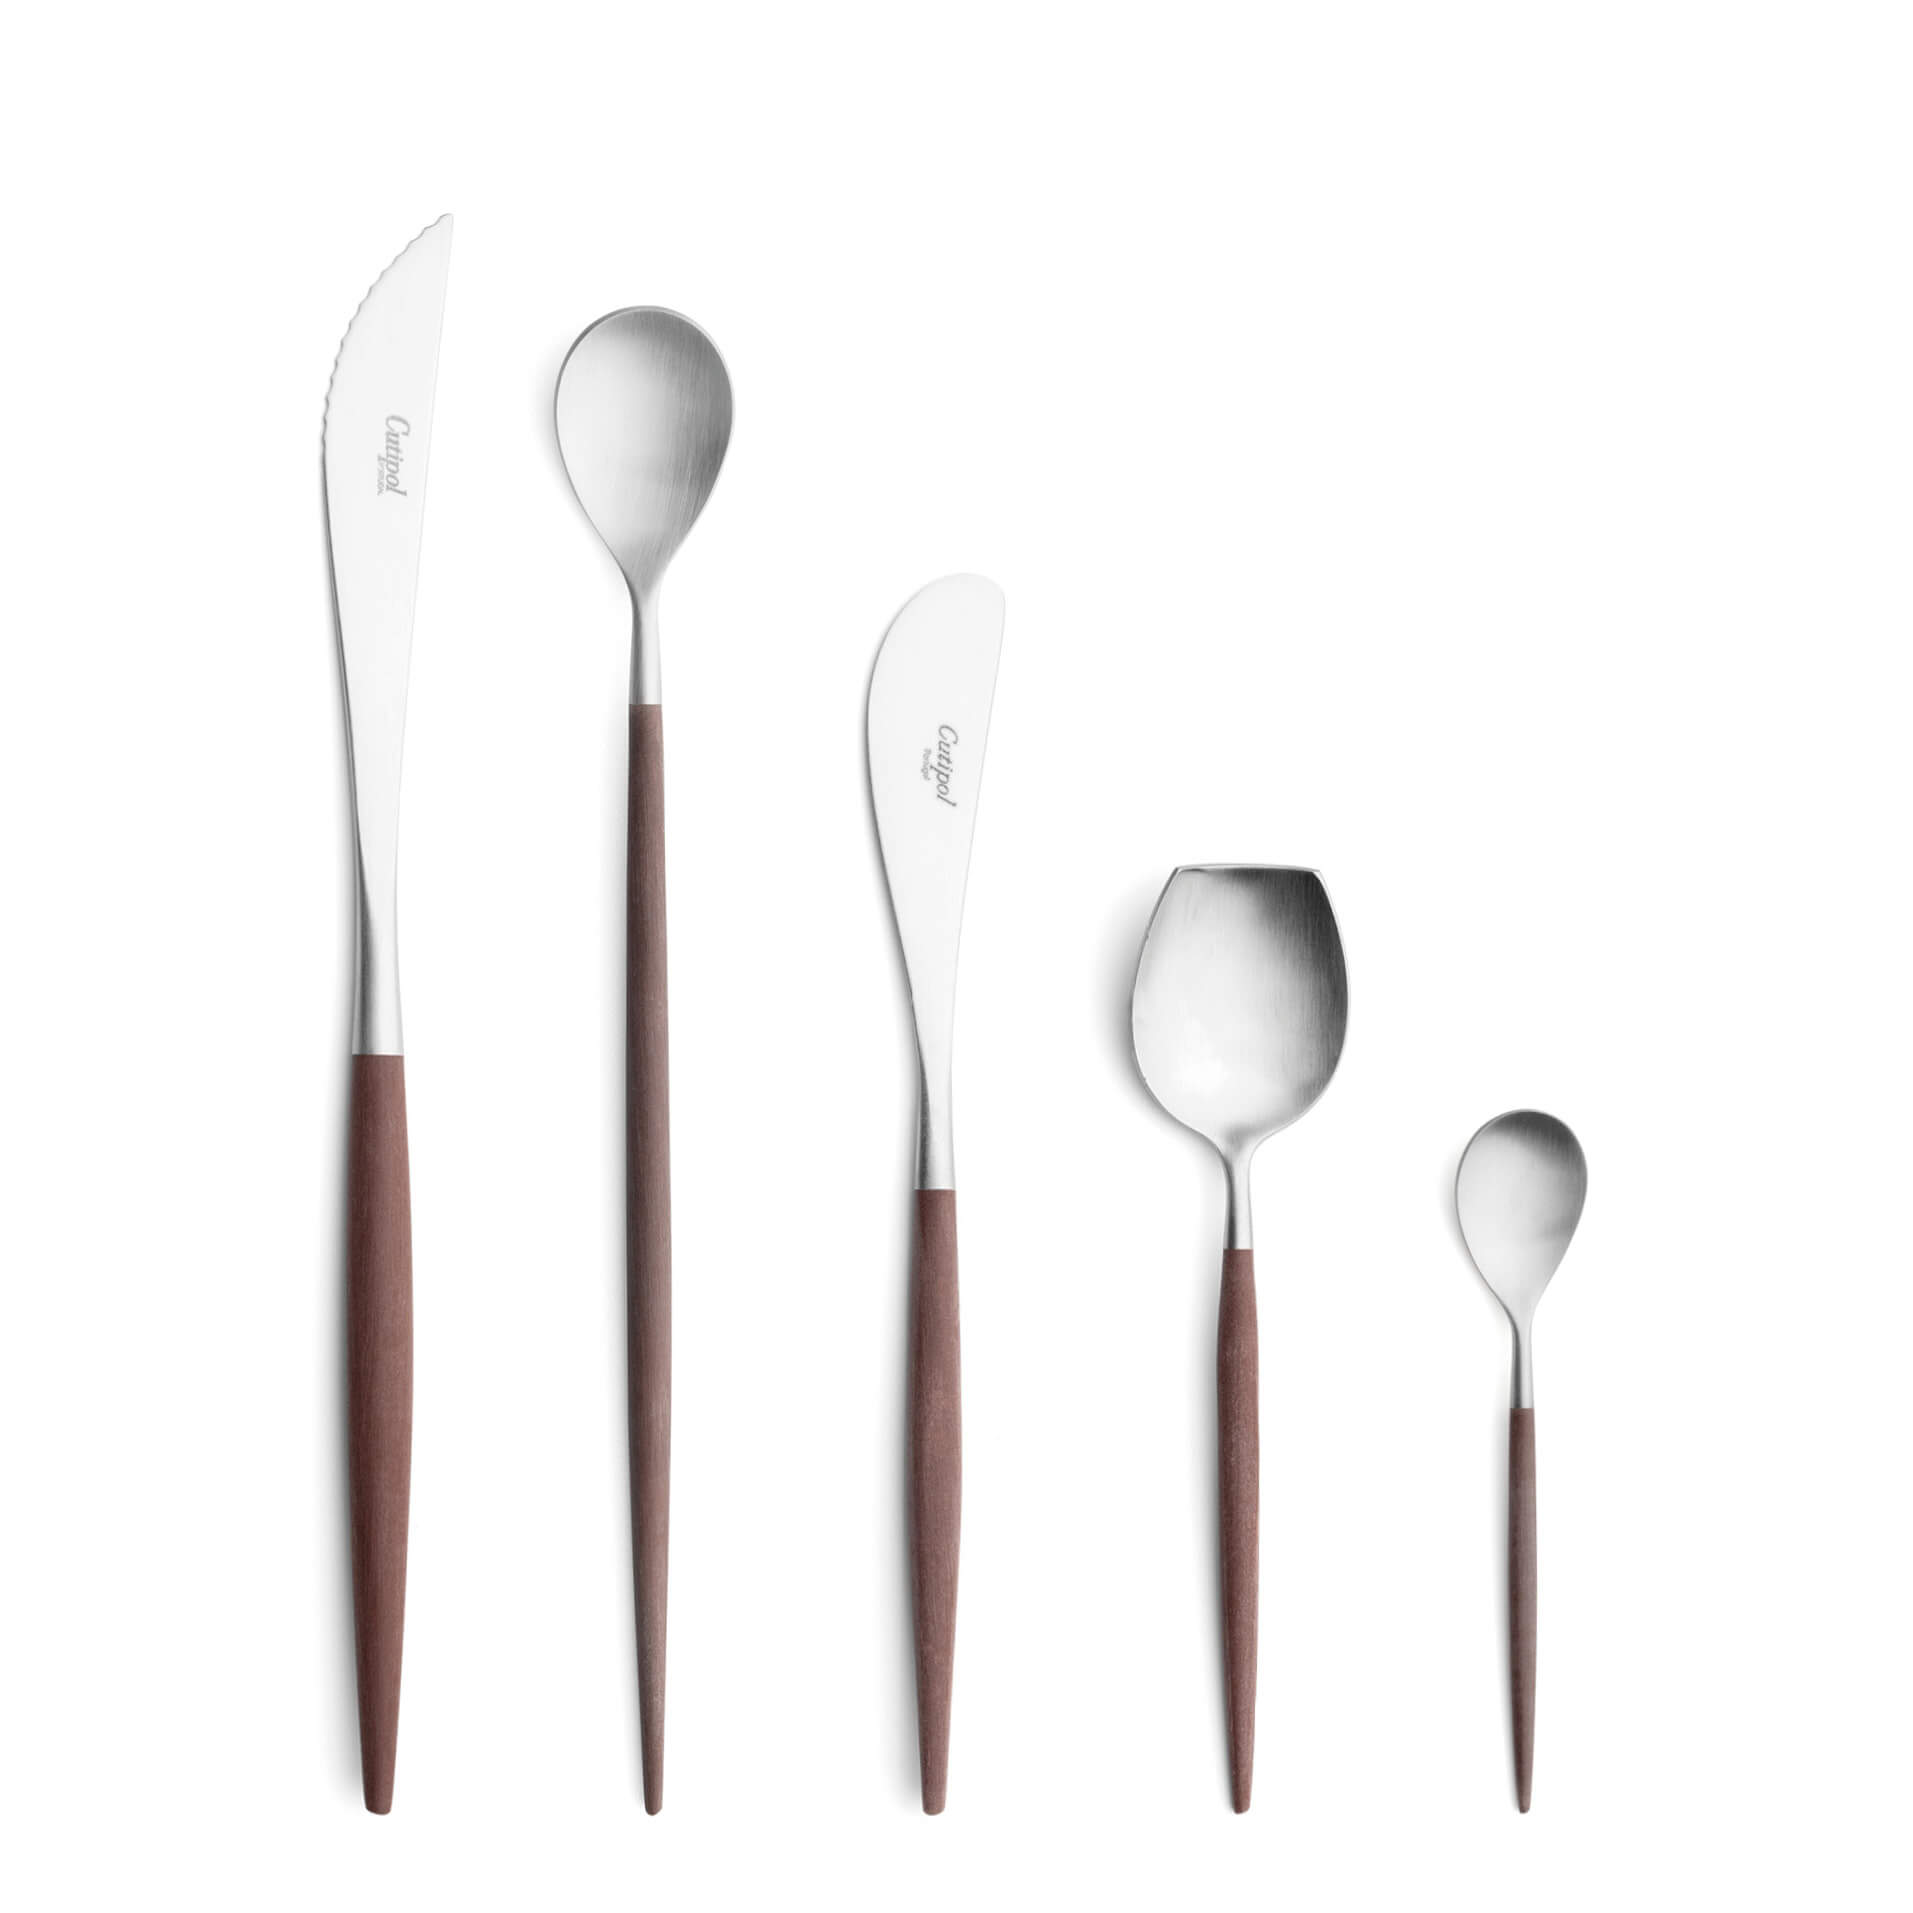 Cutipol Cutlery Mio Brown with steak knife, long drink spoon, butter knife, sugar spoon and moka spoon